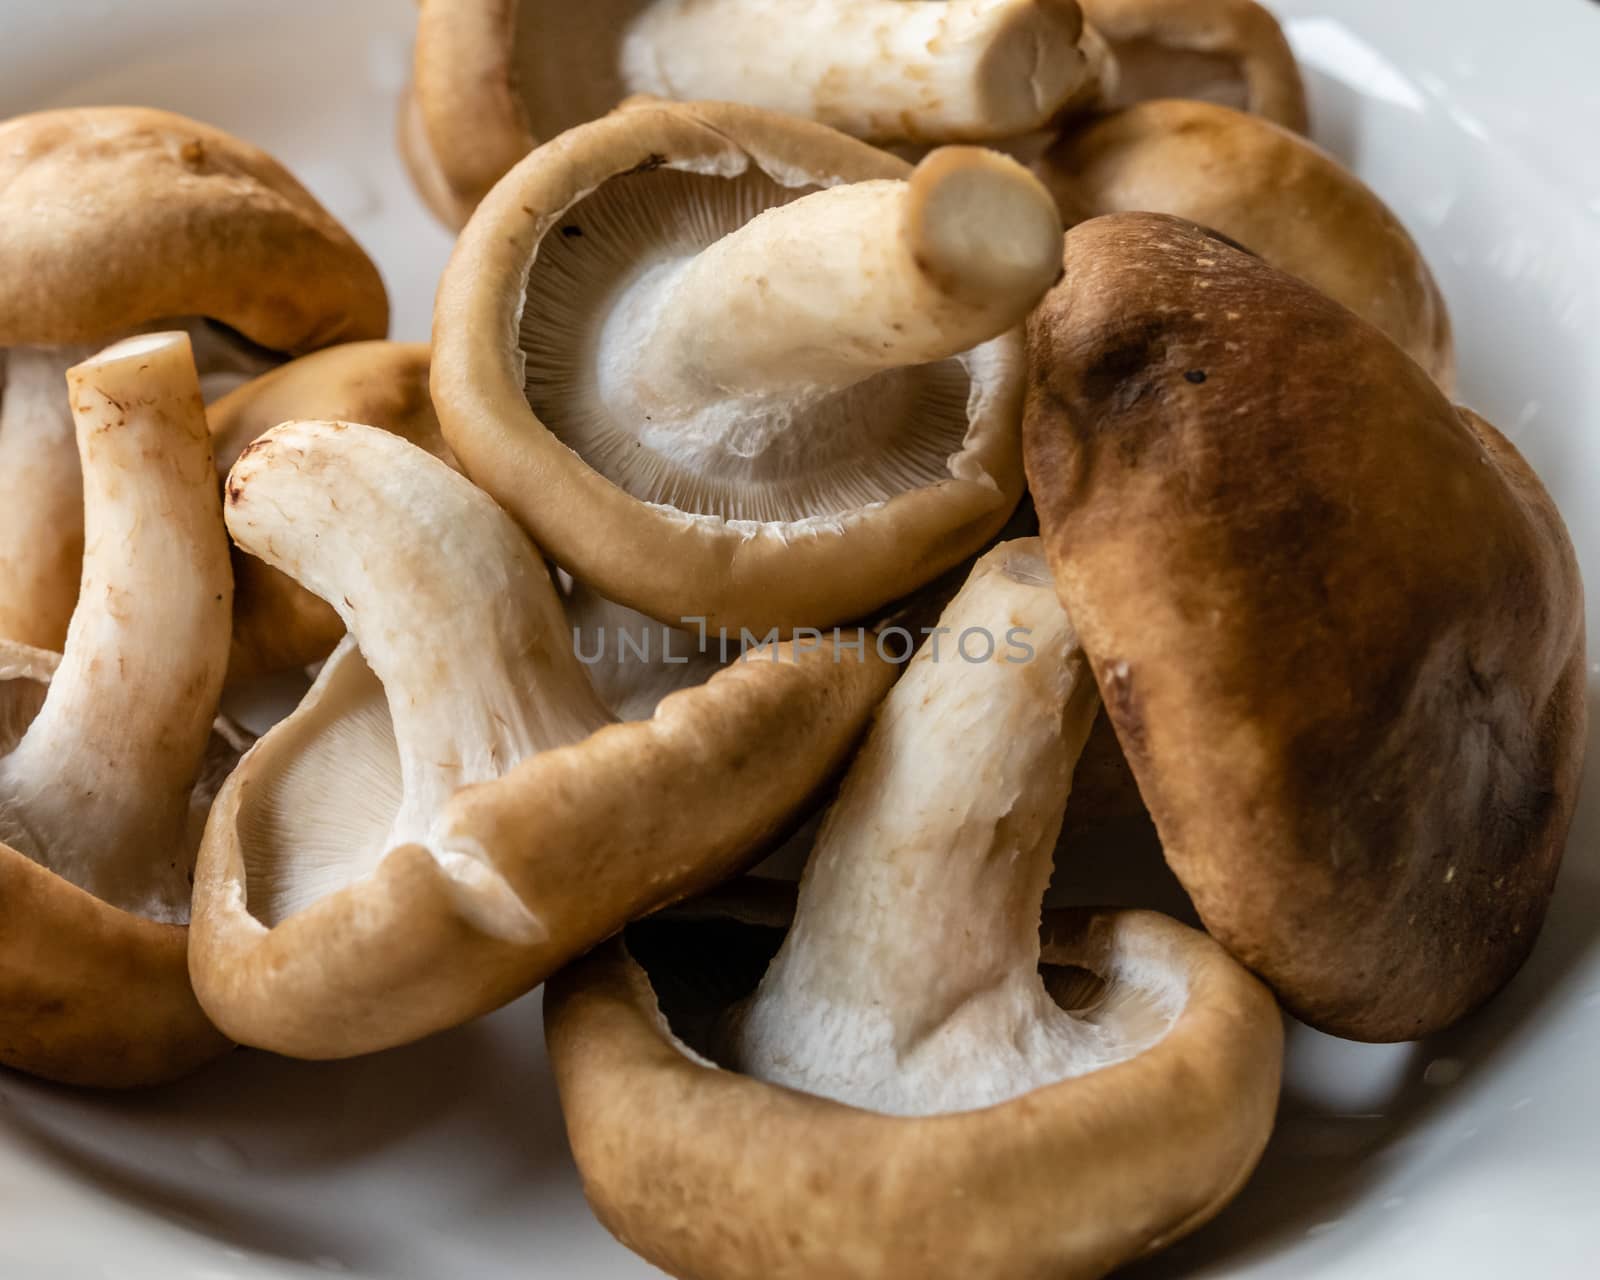 Bunch of mushrooms in a plate